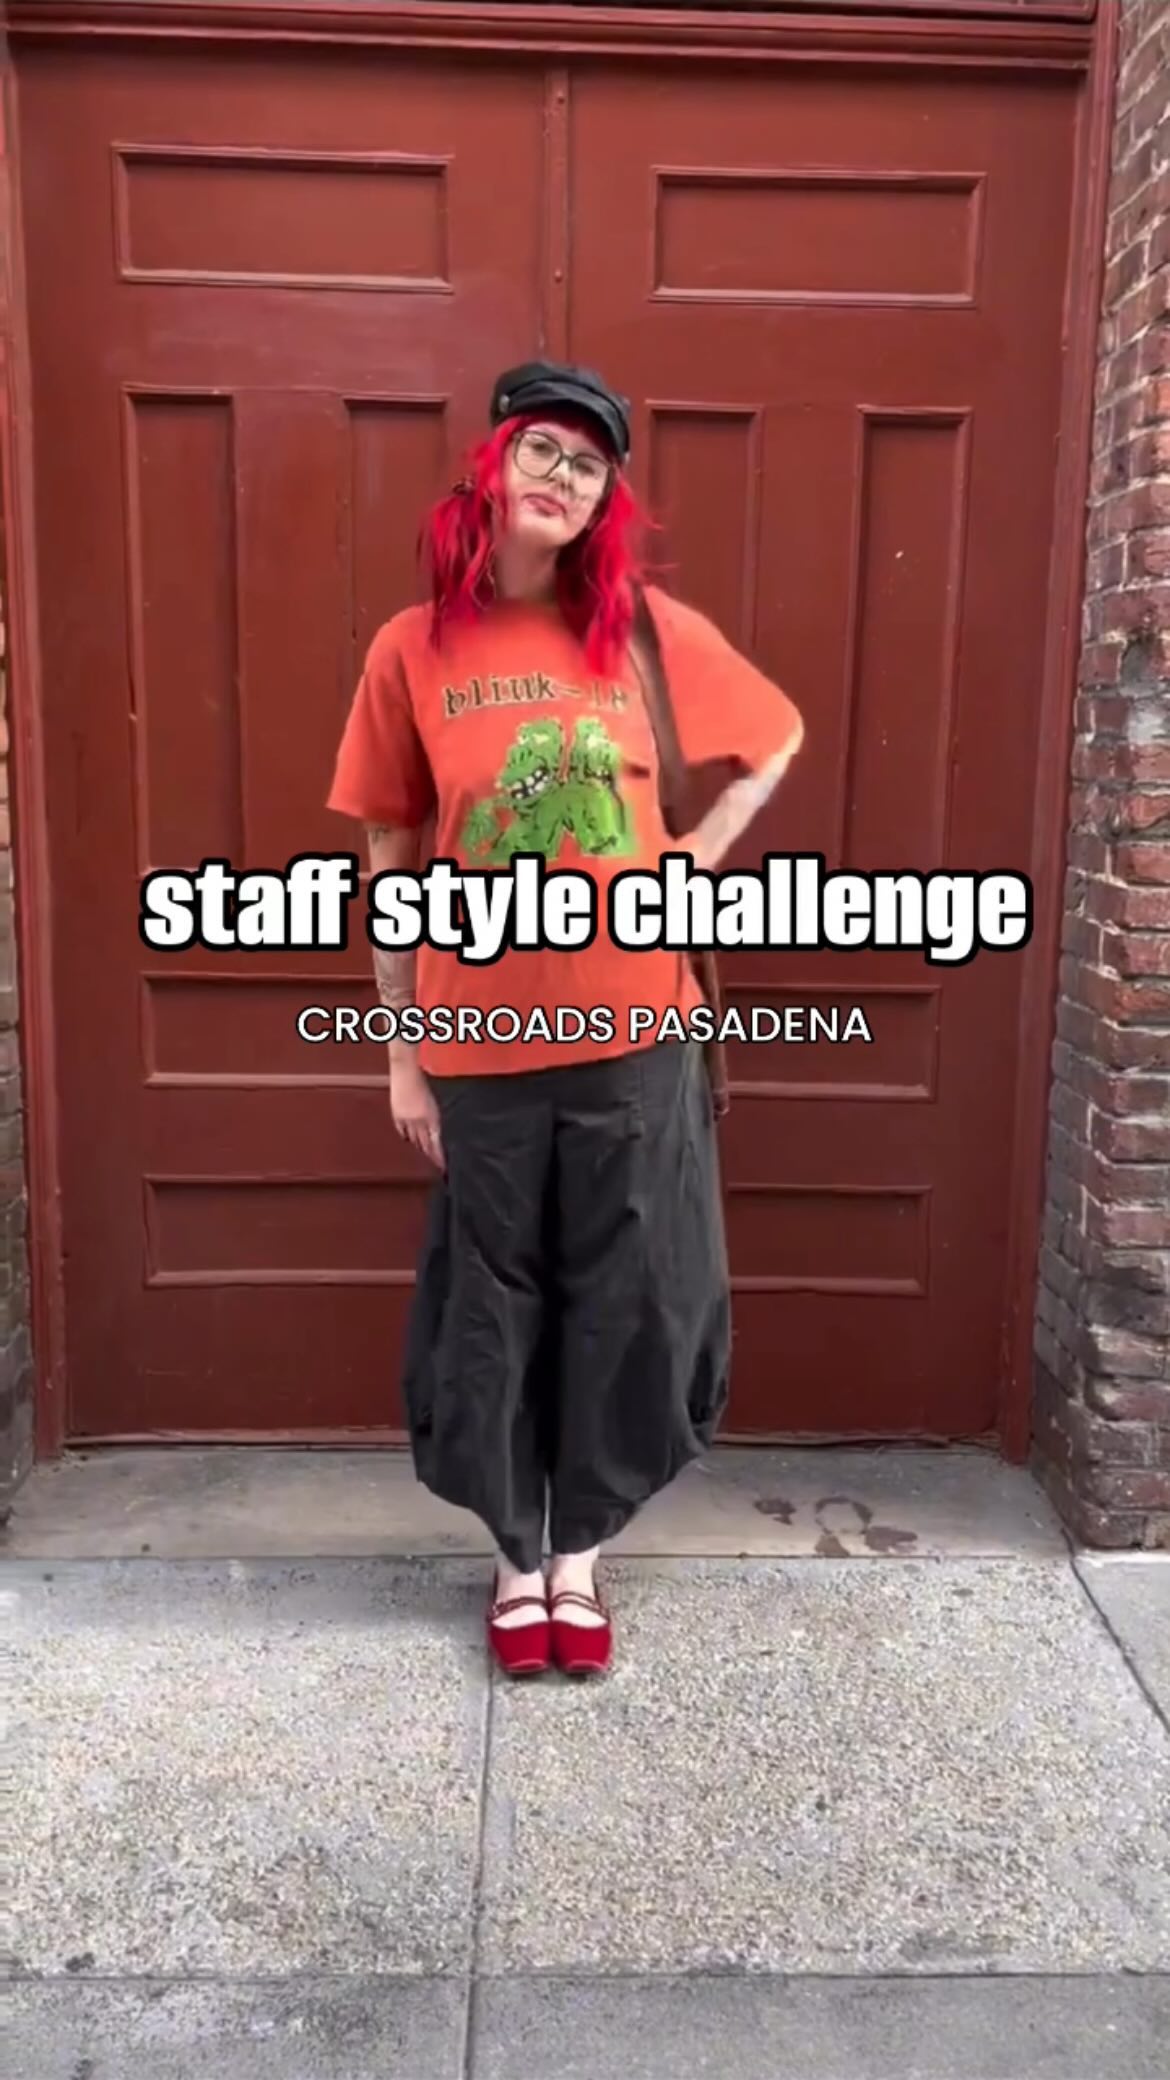 Crossroads has the BEST dressed employees. Check out these fabulous fits from our Pasadena team. 🔥

Looking for a place to share your love of fashion? Crossroads is looking for fun, fashion lovers to join our team! Click the link in our bio to learn more about careers and view our open positions. 

🎥: Crossroads Pasadena @crossroads_socal 

#crossroadstrading #crossroadsfinds #crossroadsstore #fashionfinds #buyselltrade #style #thriftfinds #consignment #shopping #womensfashion #mensfashion #fashionblogger #ootd #fashion #thrift #sustainablefashion #secondhandfirst #shopthrift #consignment #thrifted